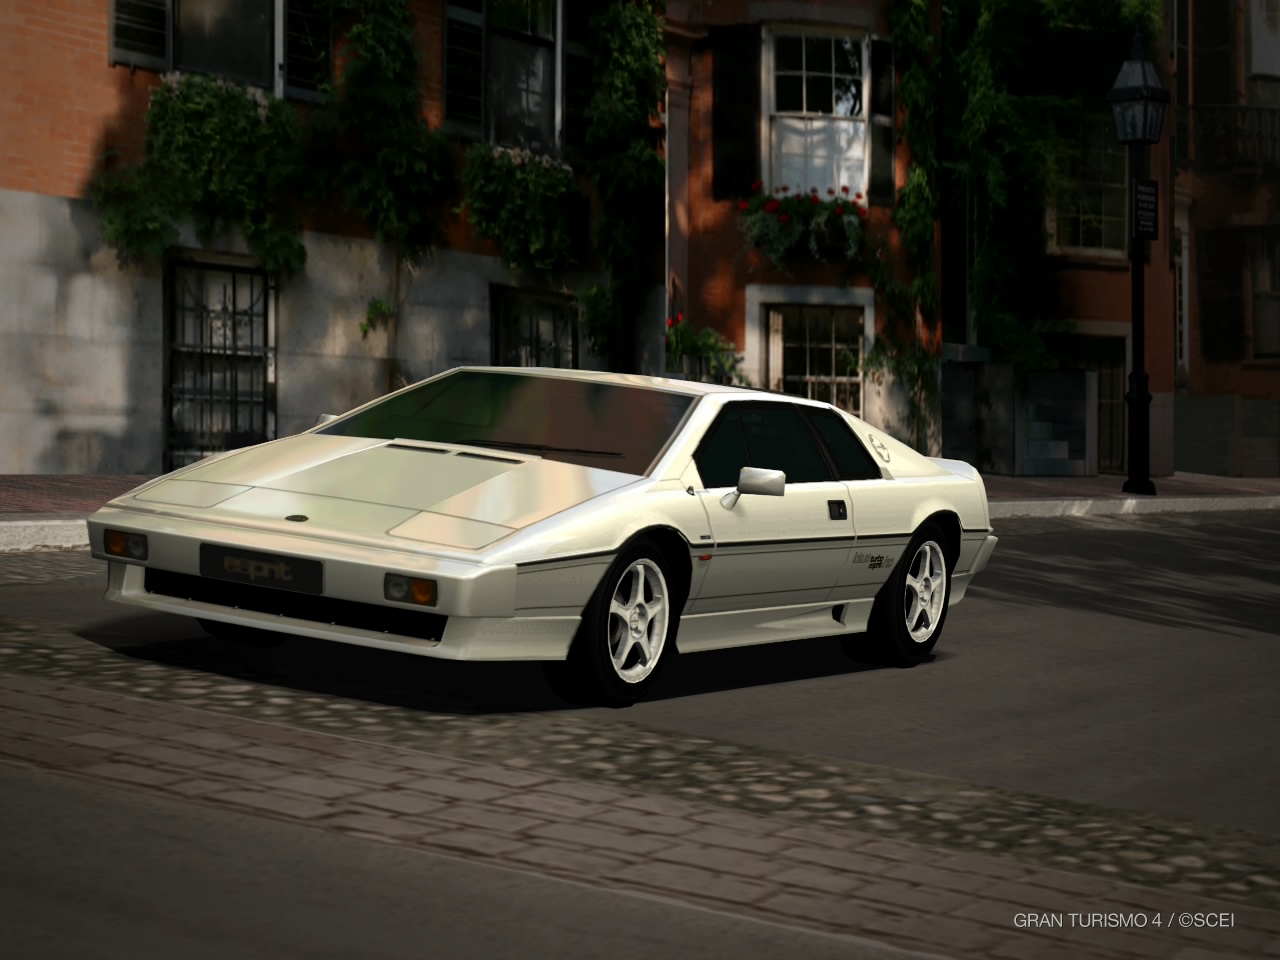 Lotus esprit turbo hc. Best photos and information of modification.